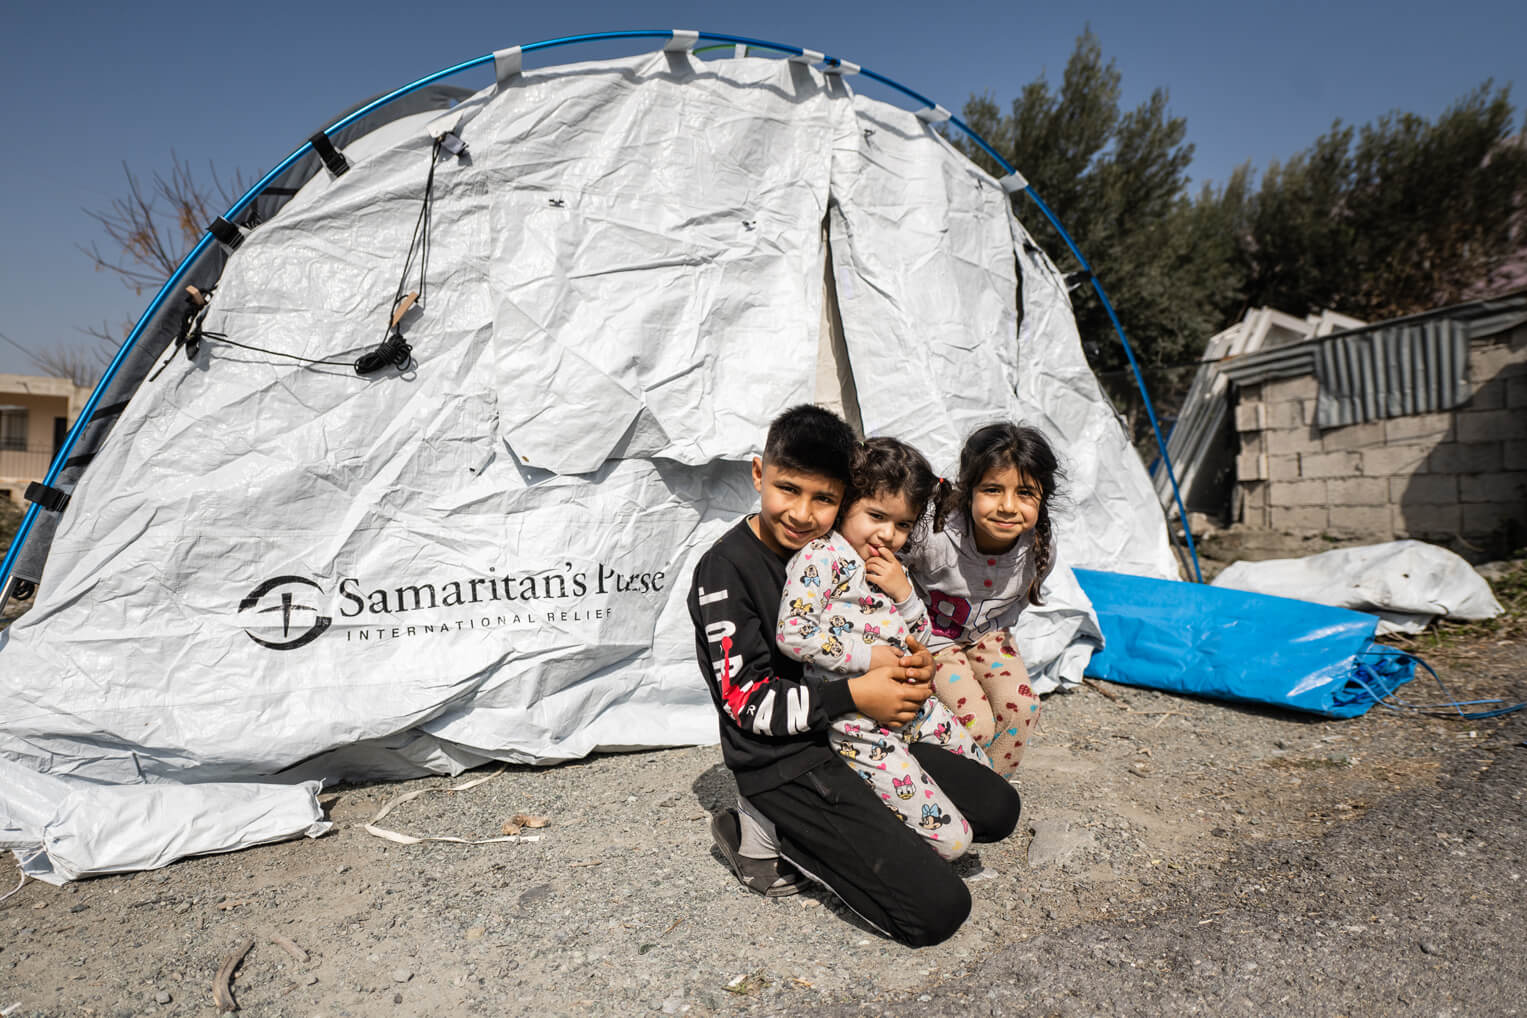 Tents provide shelter for families away from unsafe structures.